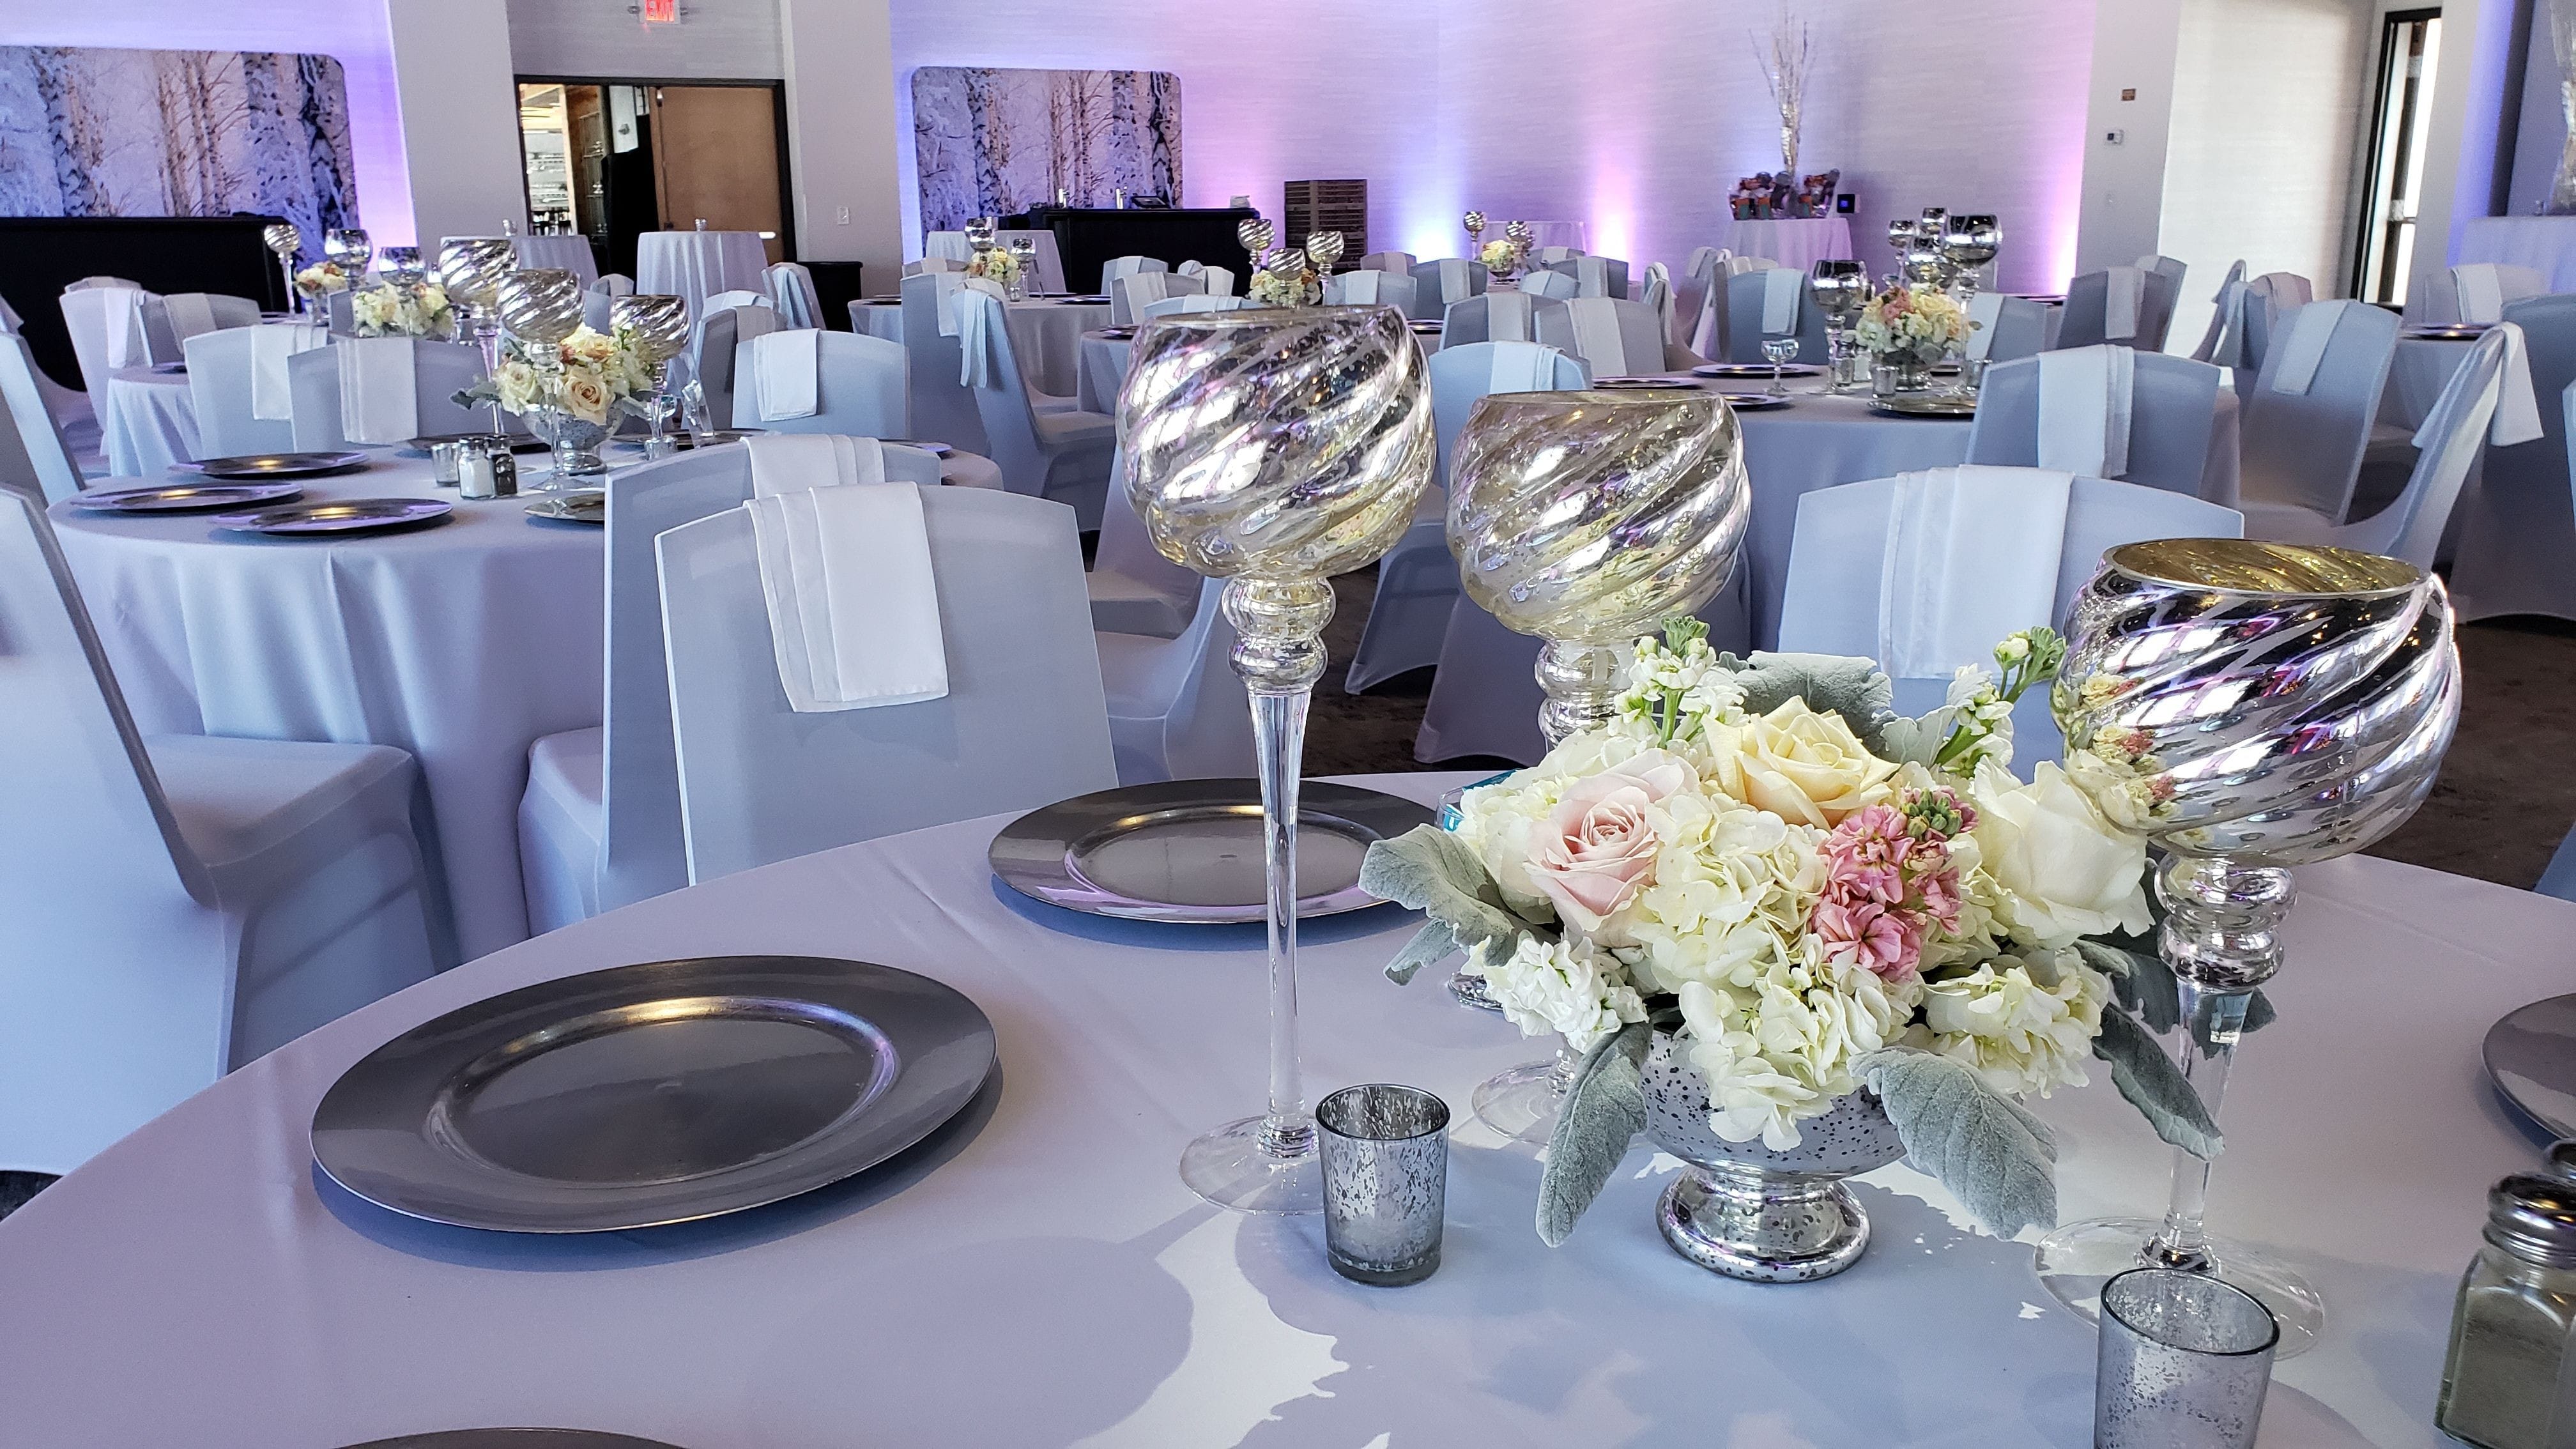 Pier B wedding lighting in two tone lavender. pin spots on flowers. decor by @thevaultduluth